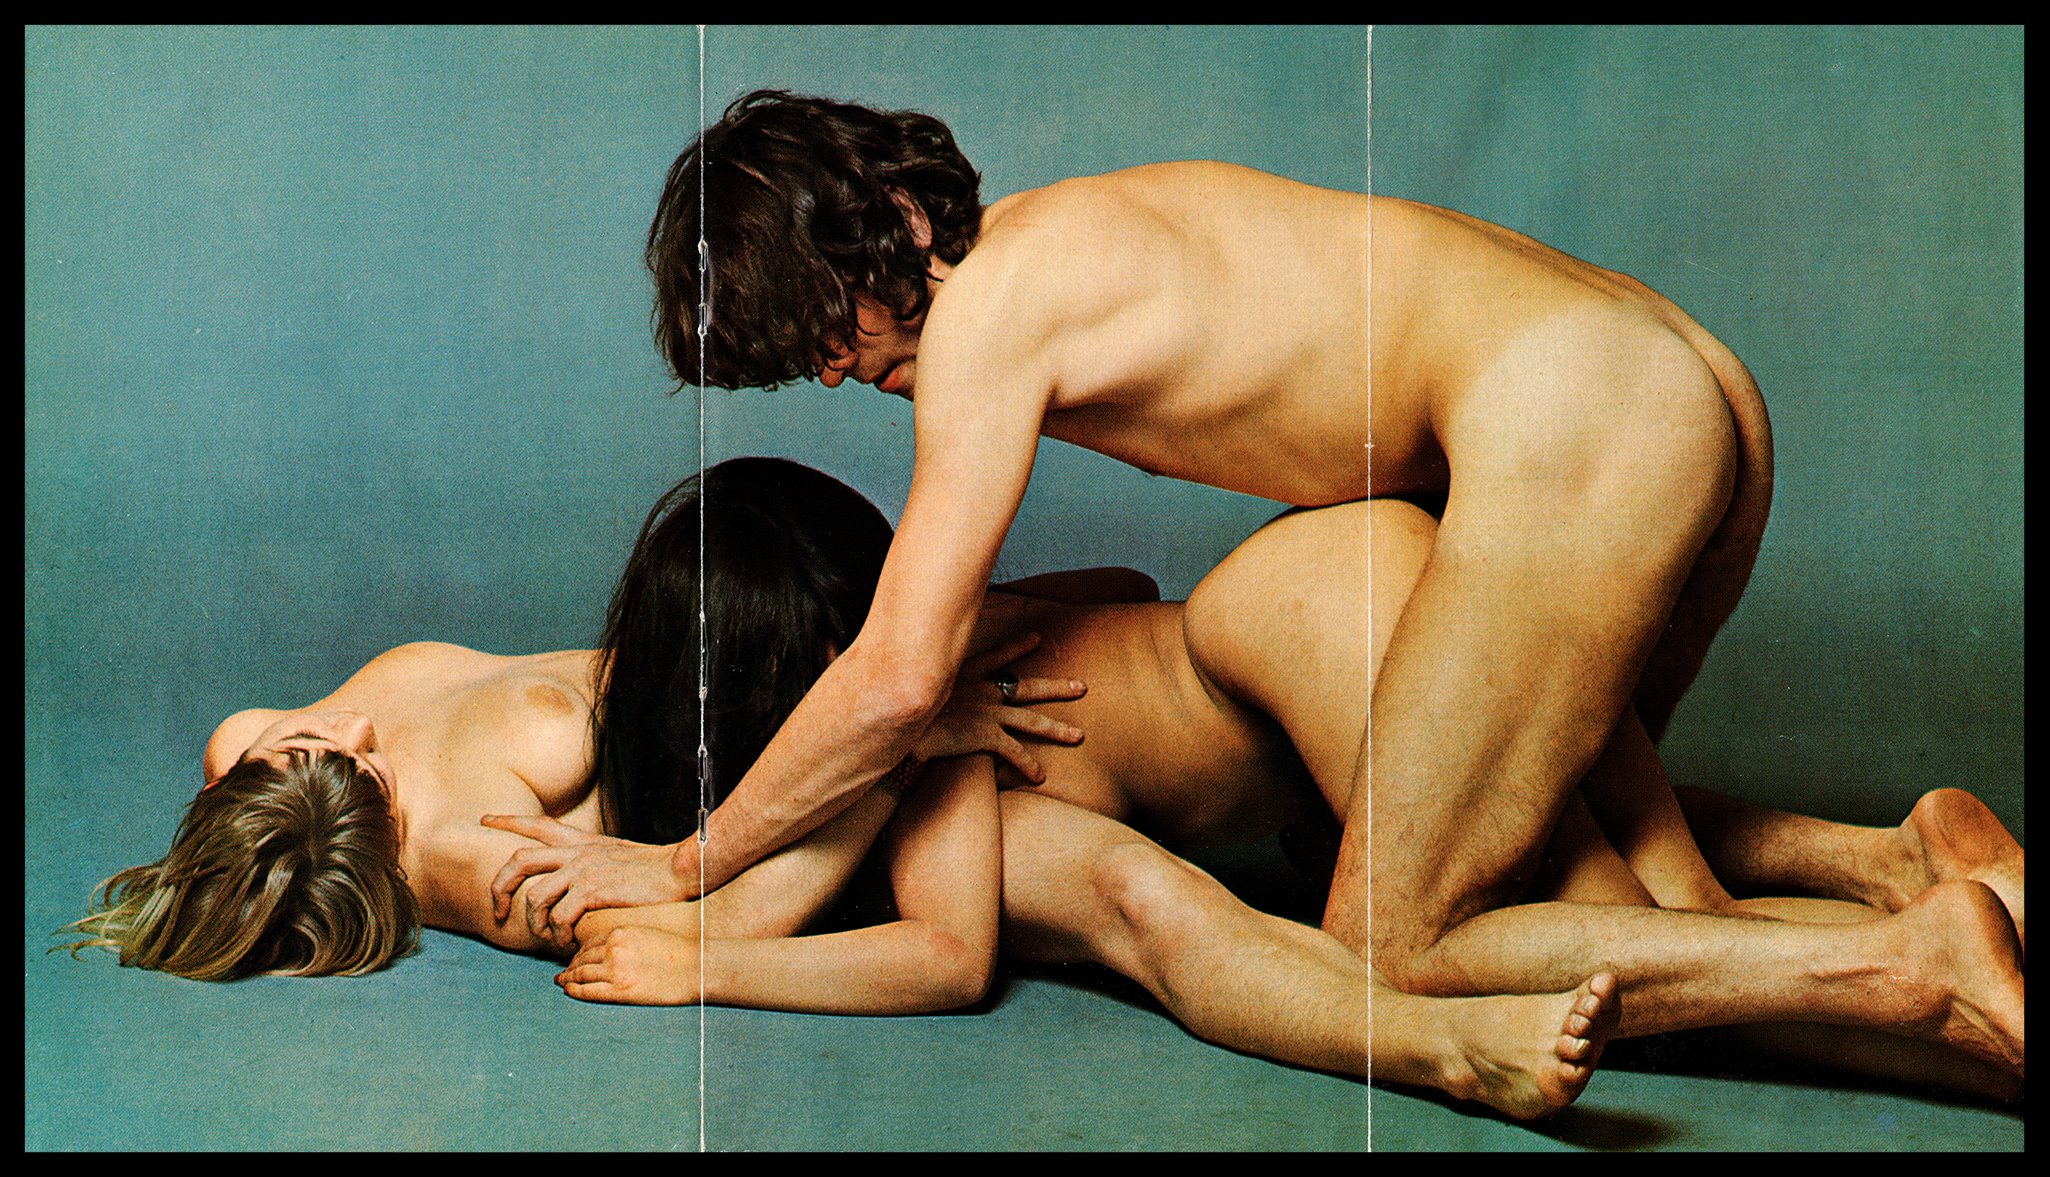 Centerfold from the Dutch pornographic periodical, "Variant," depicting a threesome. Volume 1, Number 4, 1970, "Sex in de Sauna."